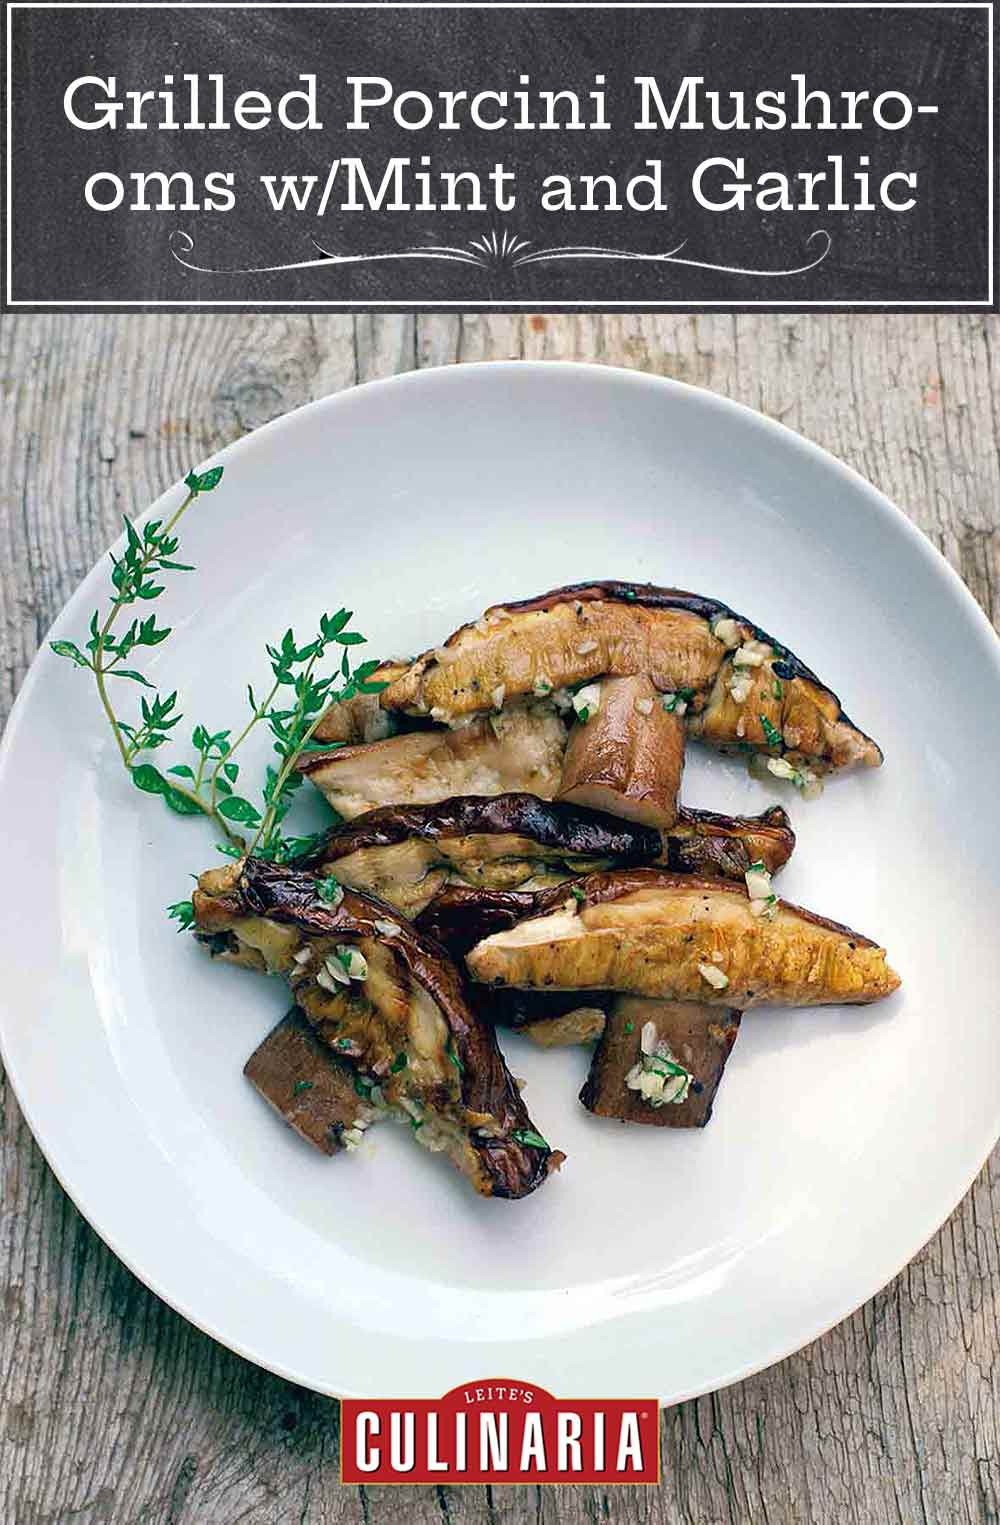 A white plate filled with sliced grilled porcini mushrooms with mint and garlic, garnished with a sprig of thyme.